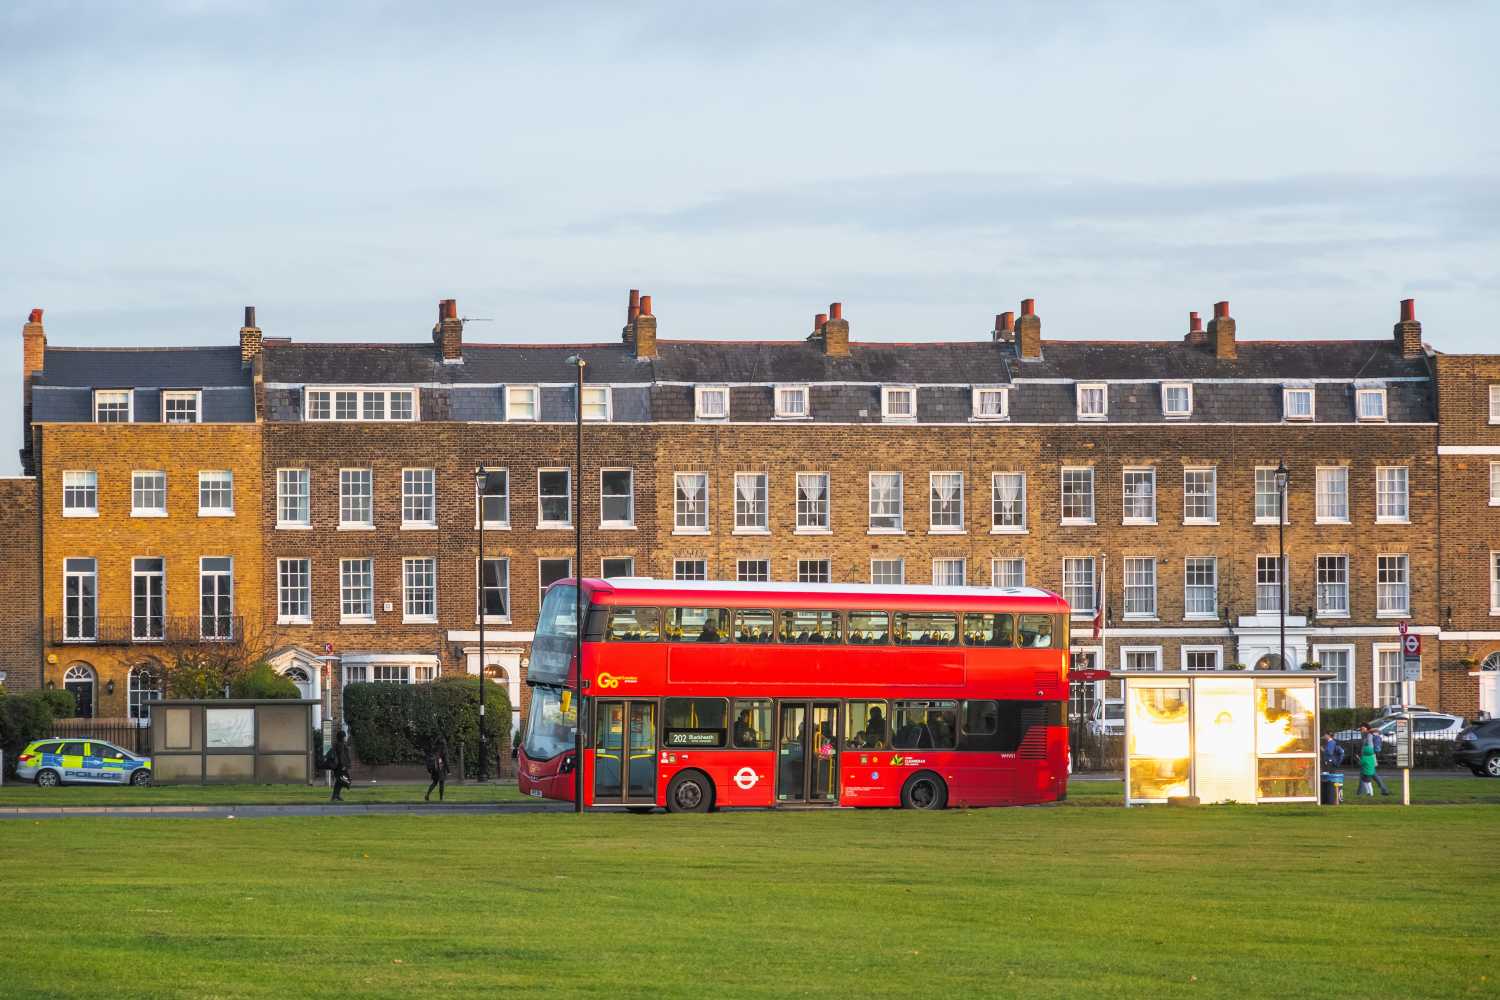 View of Lewisham with a red double-decker bus in the foreground